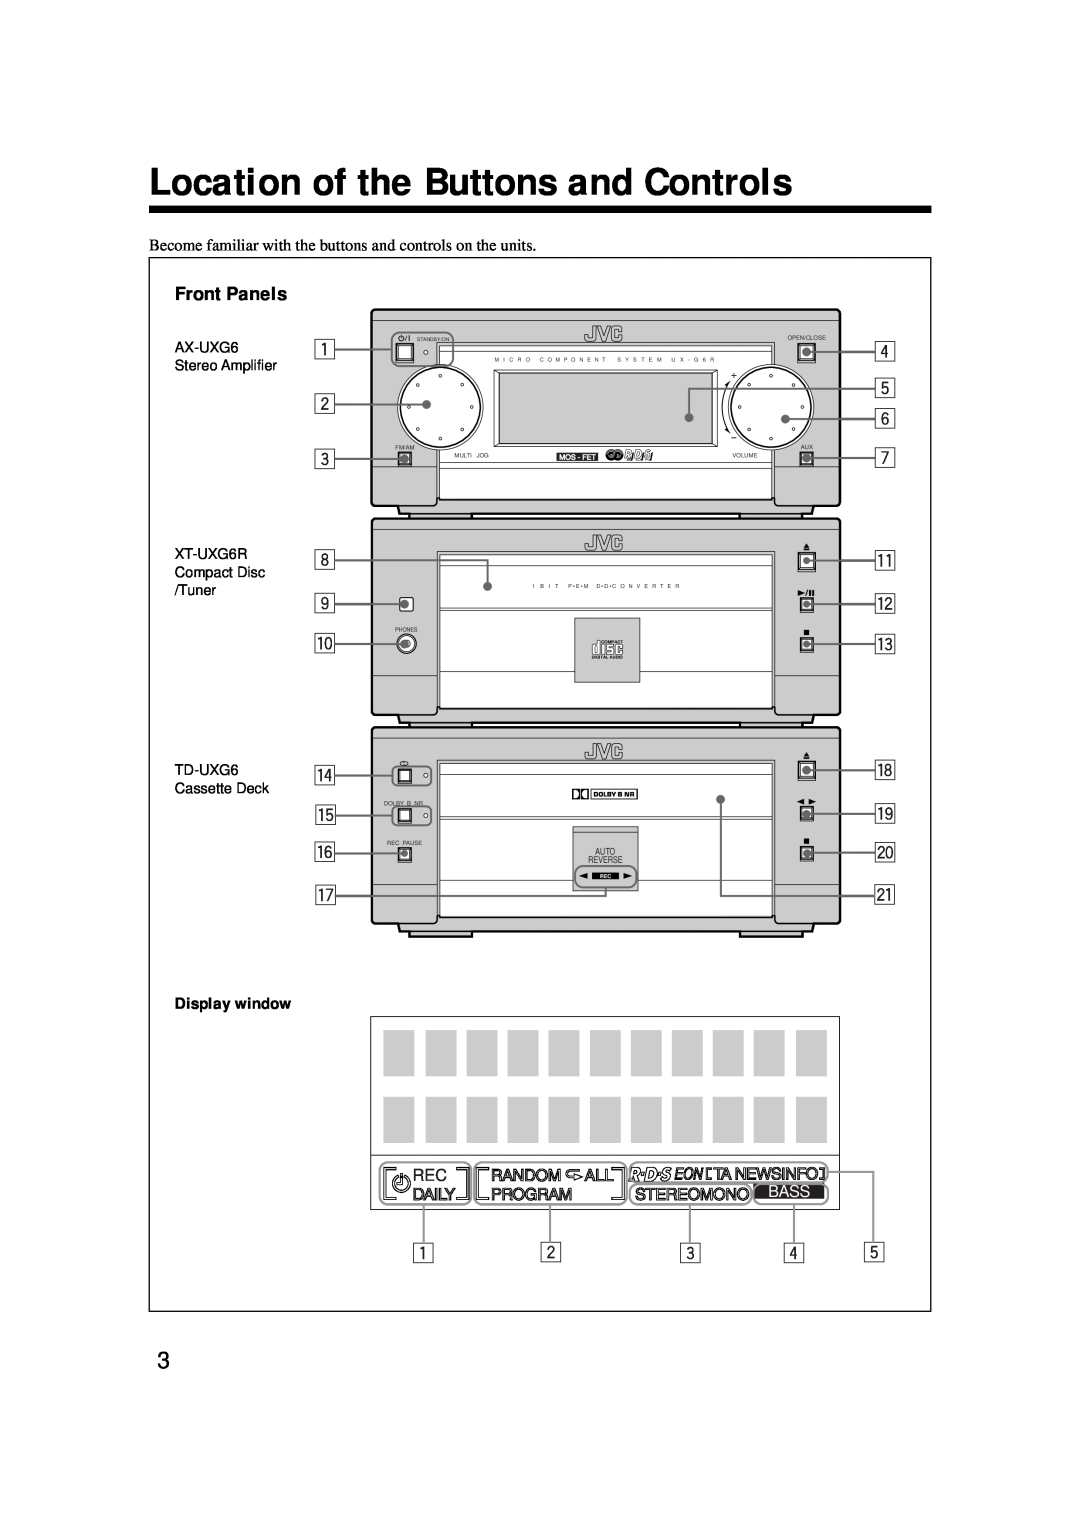 JVC UX-G6R, XT-UXG6R, SP-UXG6, AX-UXG6, TD-UXG6 manual Location of the Buttons and Controls, Front Panels 